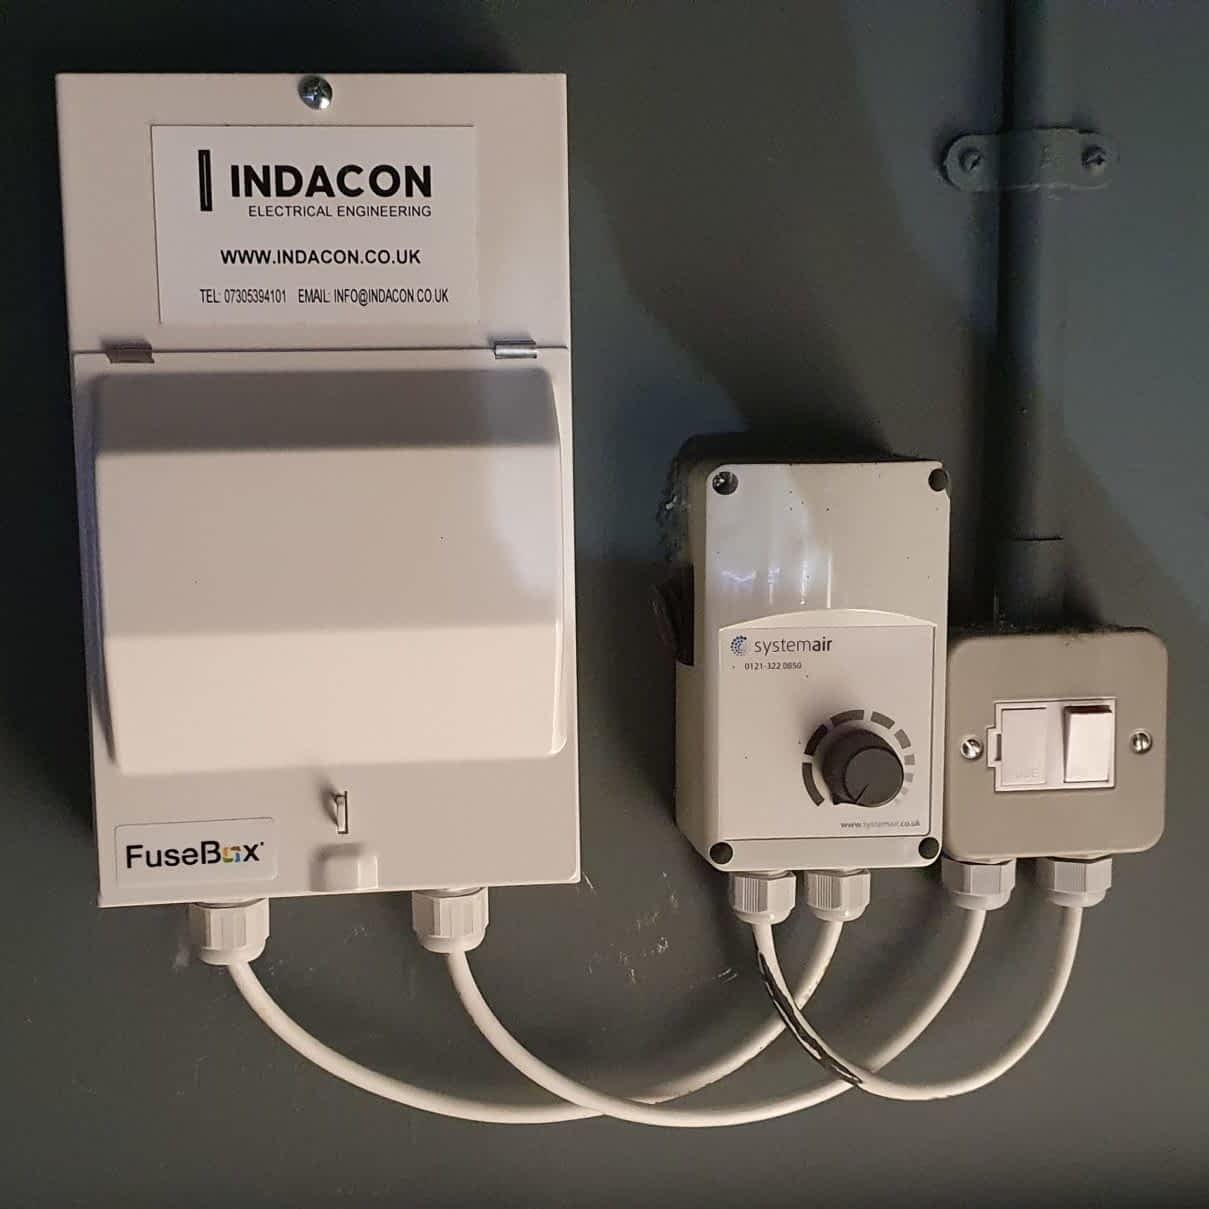 Industrial and commercial electrical installation - industrial and commercial electrical installation - Timer fan controls installed by Indacon Ltd